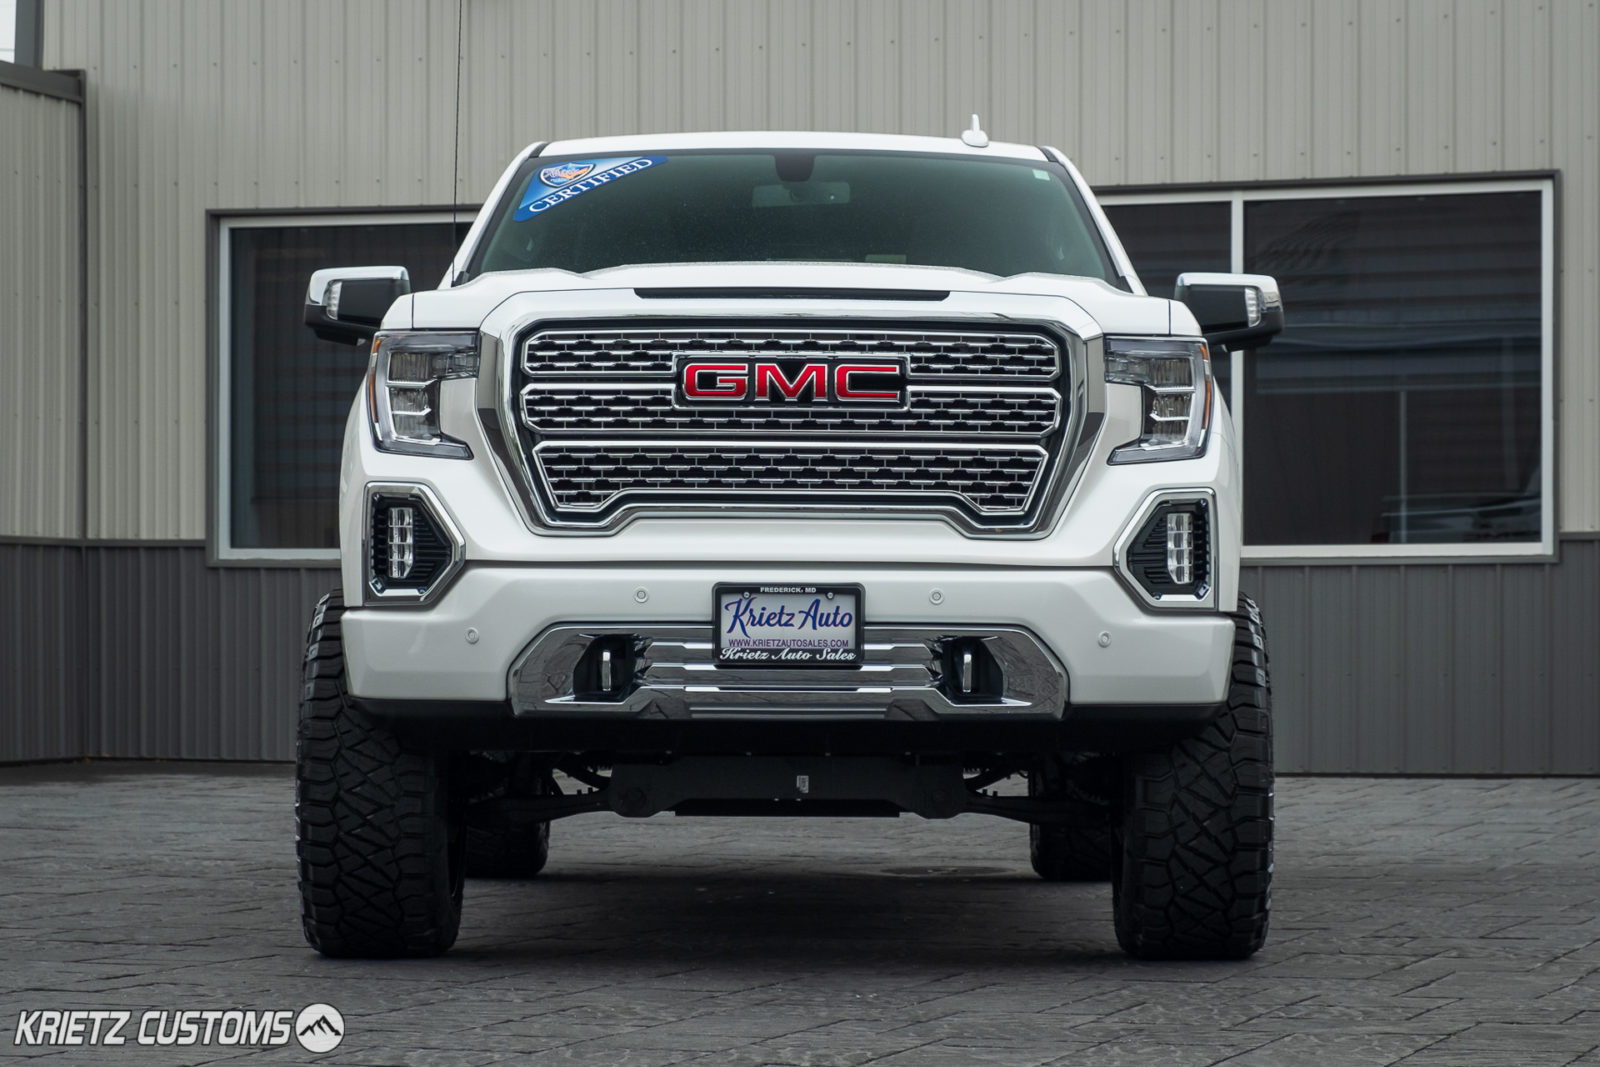 Lifted 2019 GMC Sierra 1500 with 22×12 Fuel Blitz Wheels and 6 inch